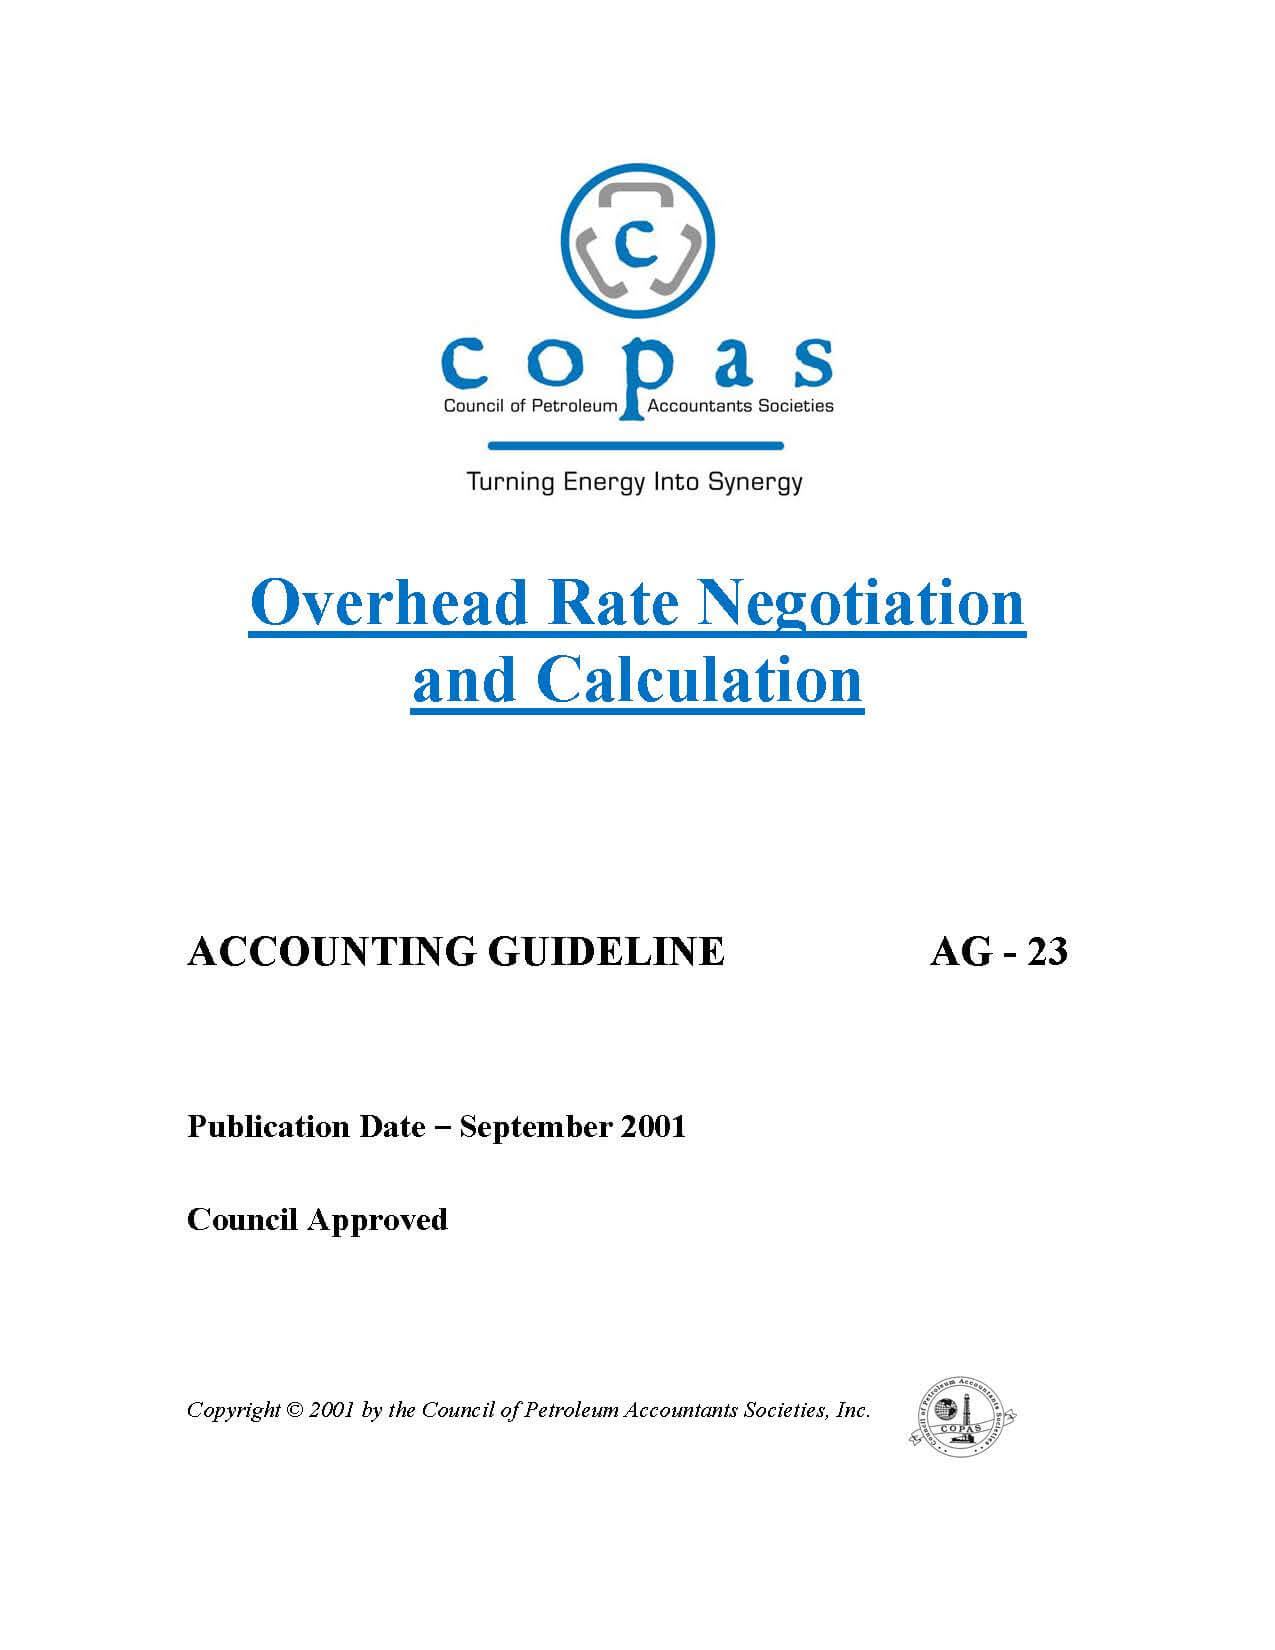 AG-23 Overhead Rate Negotiation & Calculation - products AG 23 Overhead Rate Negotiation and Calculation - Council of Petroleum Accountants Societies